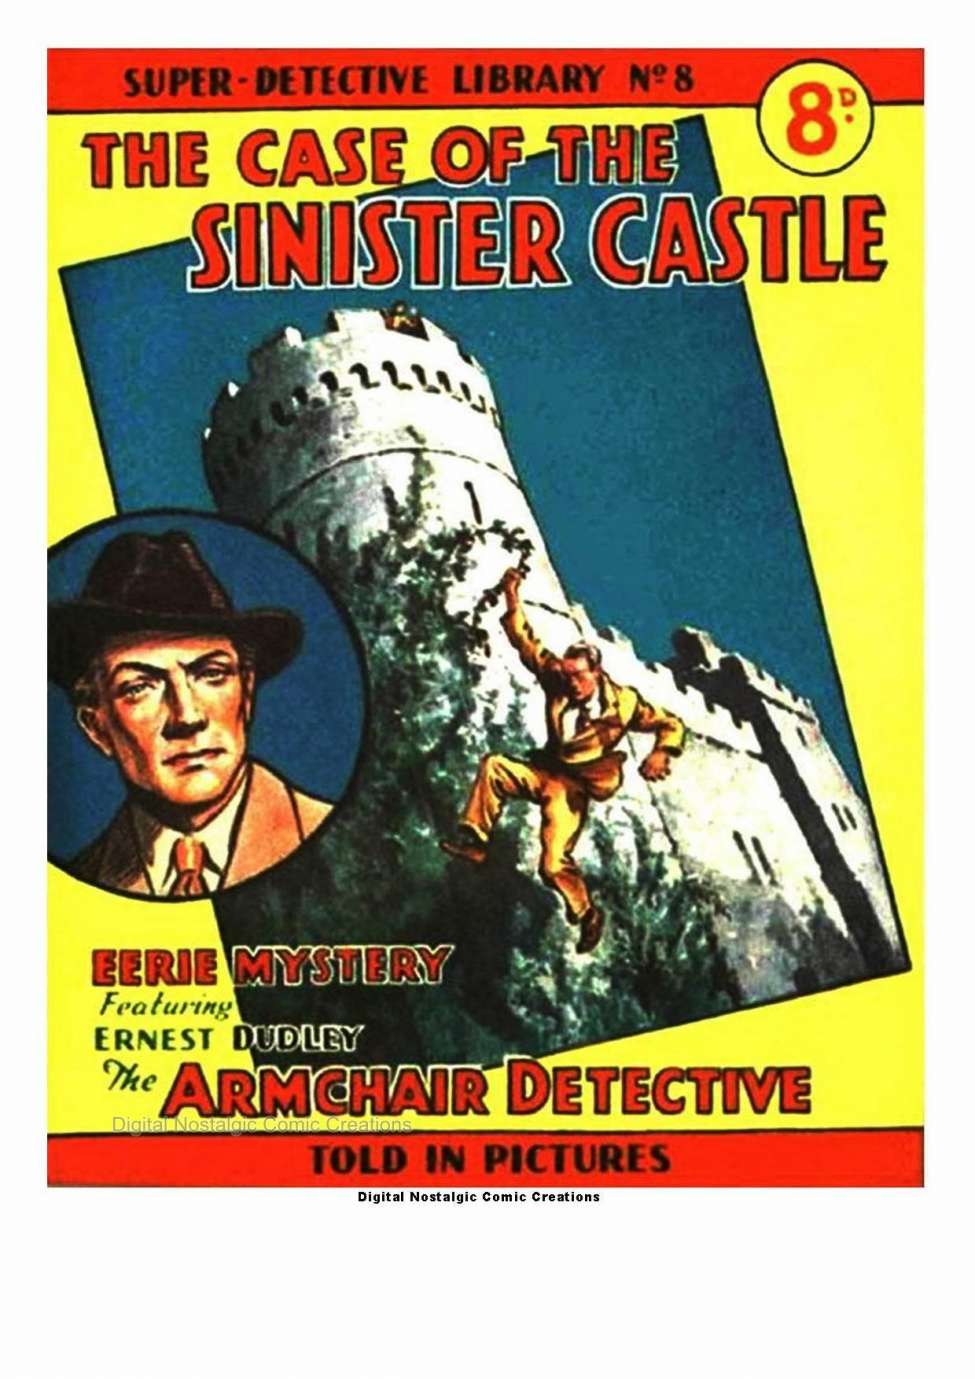 Comic Book Cover For Super Detective Library 8 - The Case of The Sinister Castle